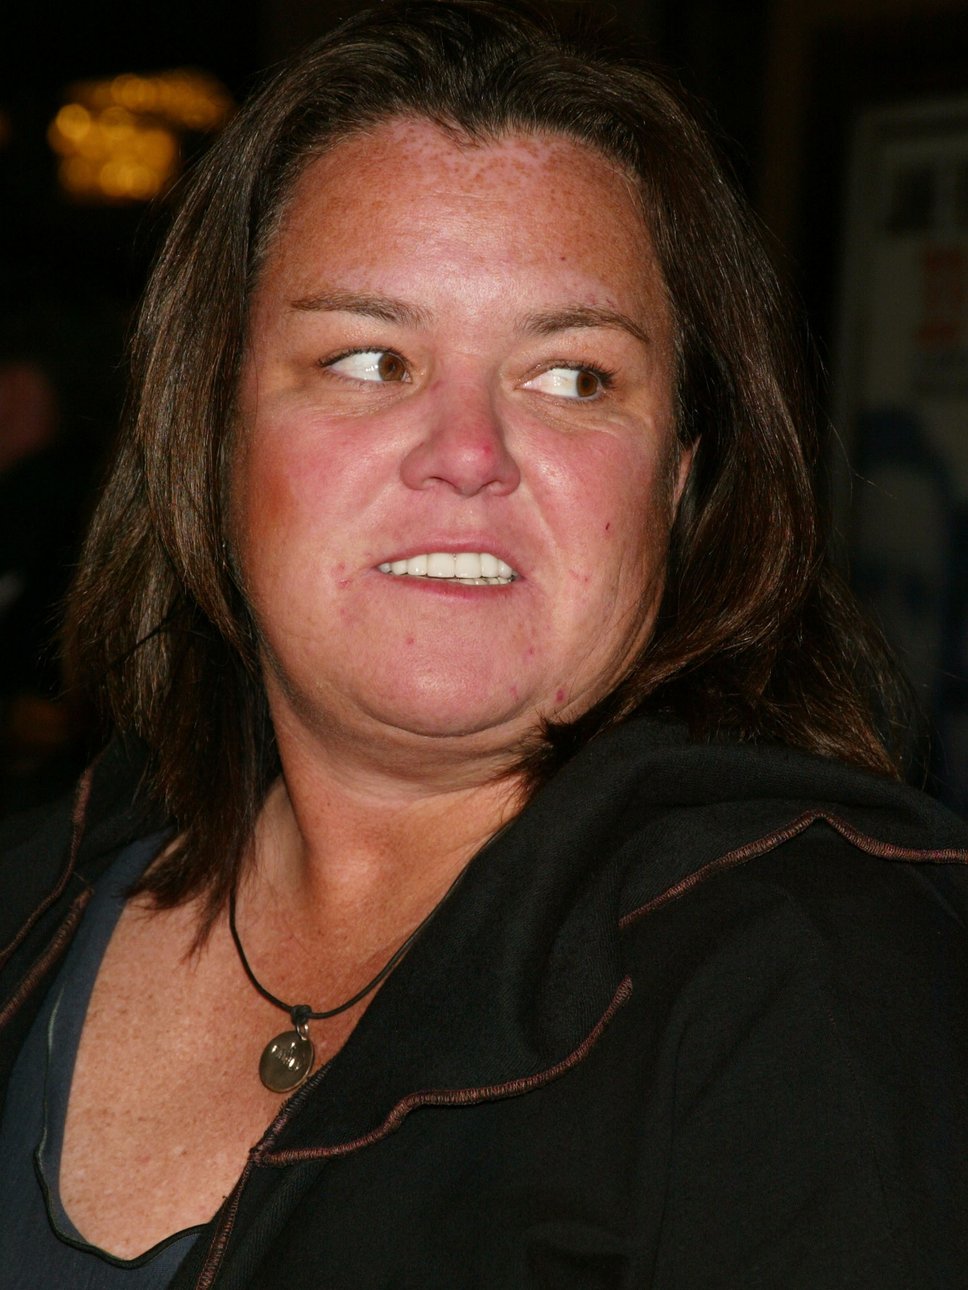 rosie_odonnell_without_makeup.jpg